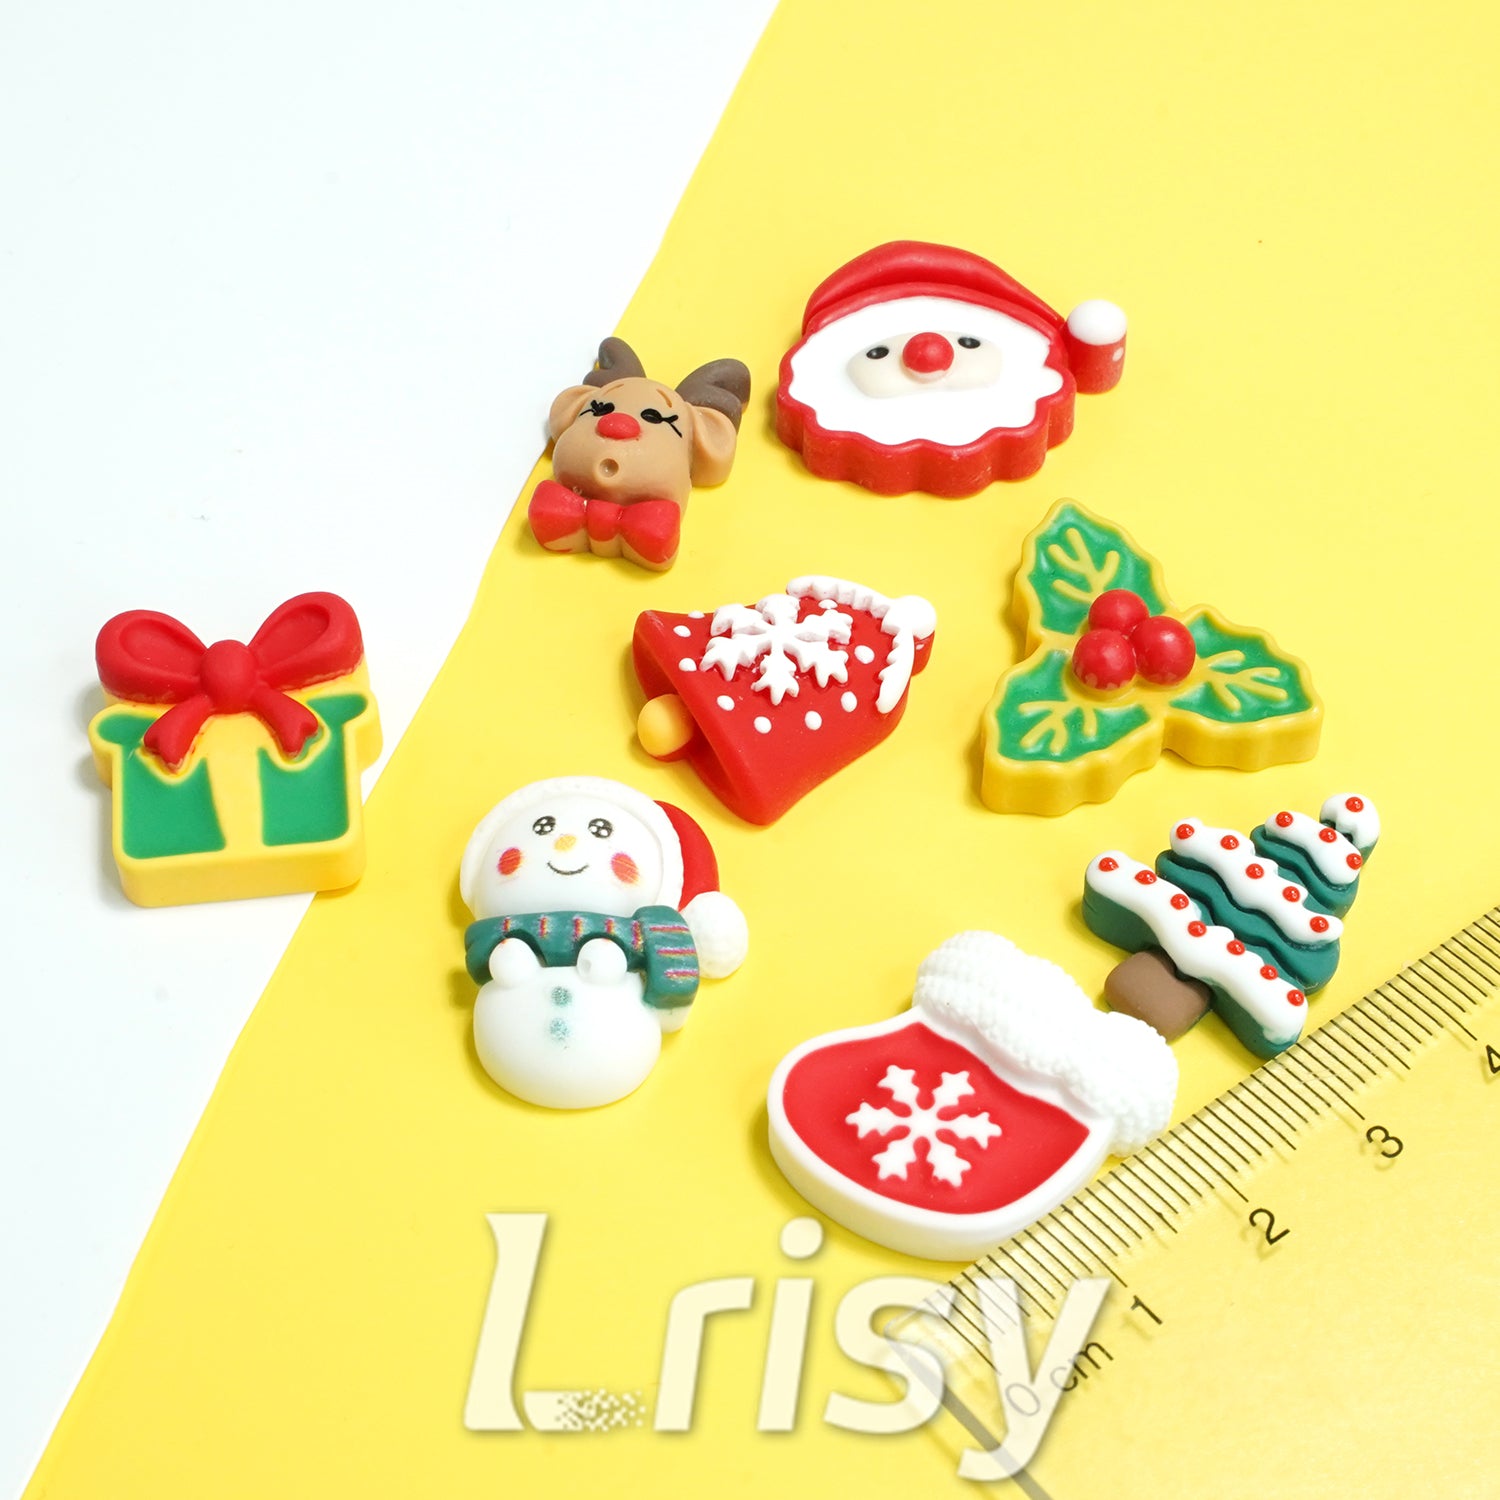 Lrisy Slime Charms Cabochons Jewelry Resin Ornament Accessories Set 02